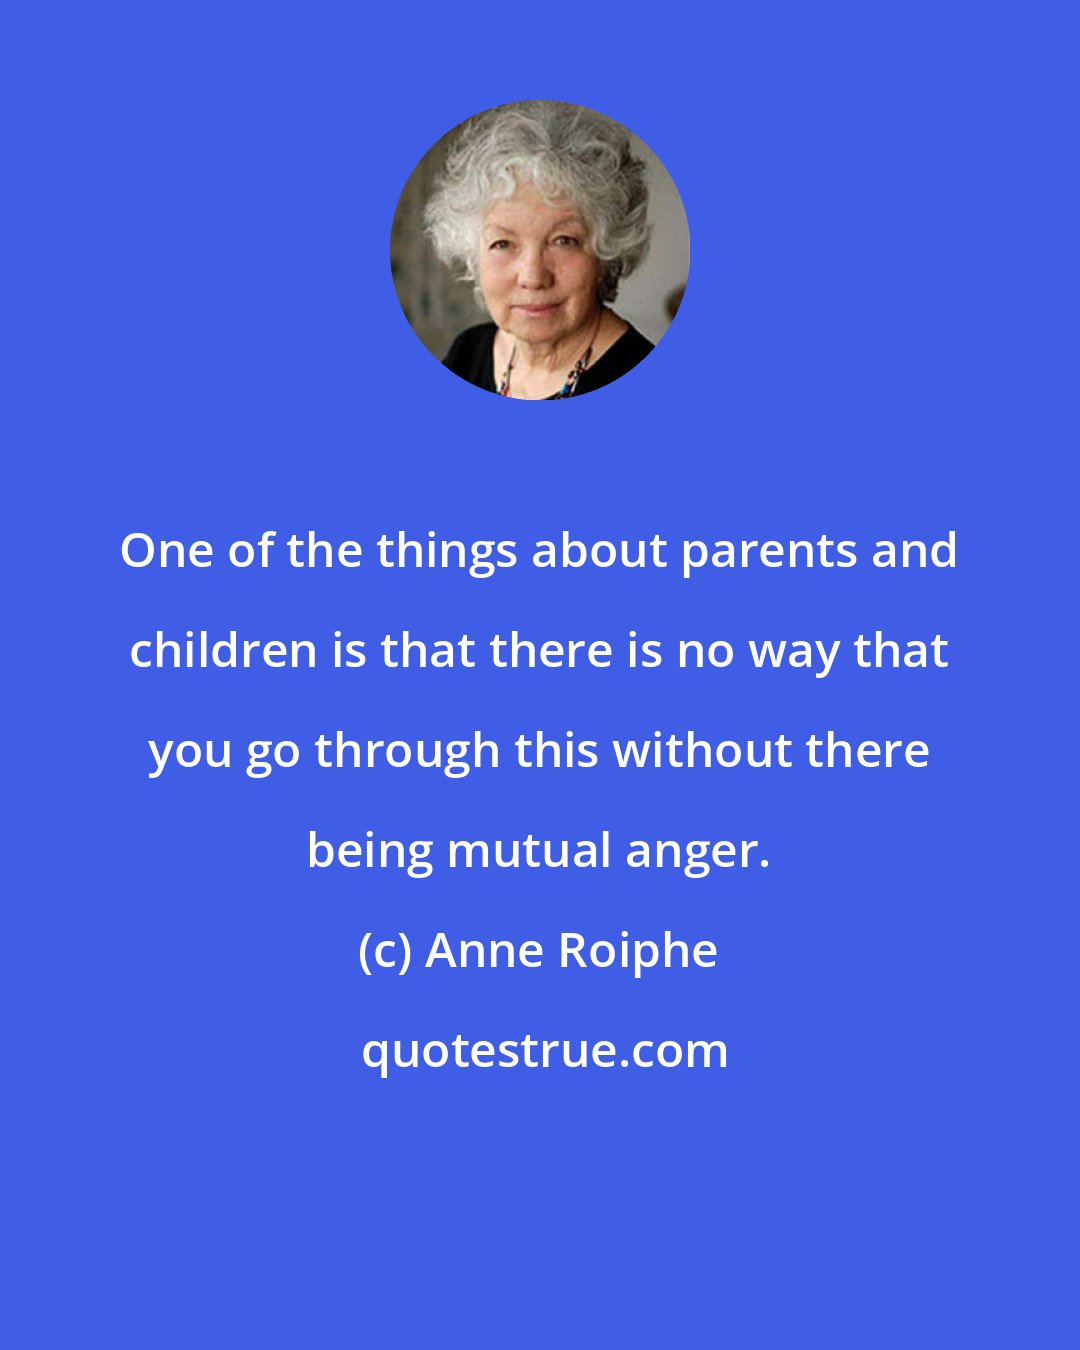 Anne Roiphe: One of the things about parents and children is that there is no way that you go through this without there being mutual anger.